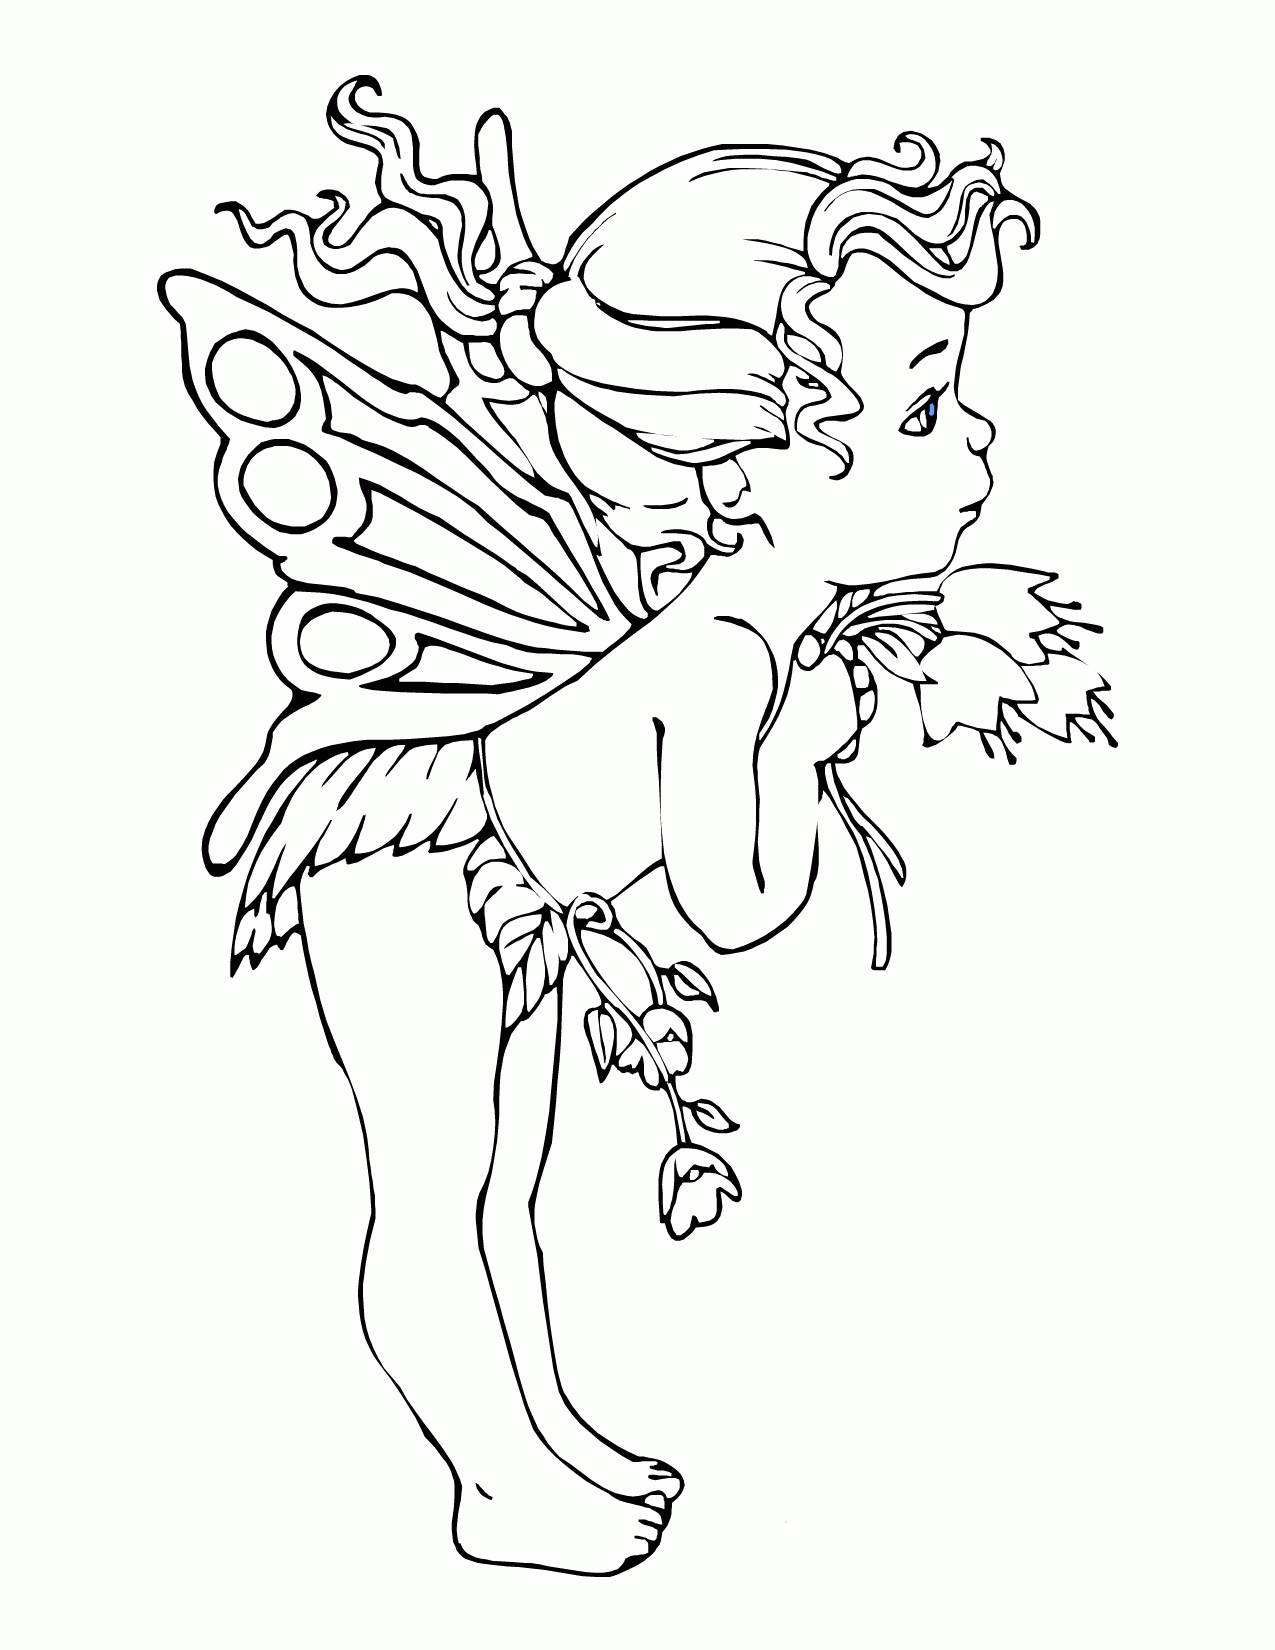 Tooth Fairy For Kids - Coloring Pages for Kids and for Adults